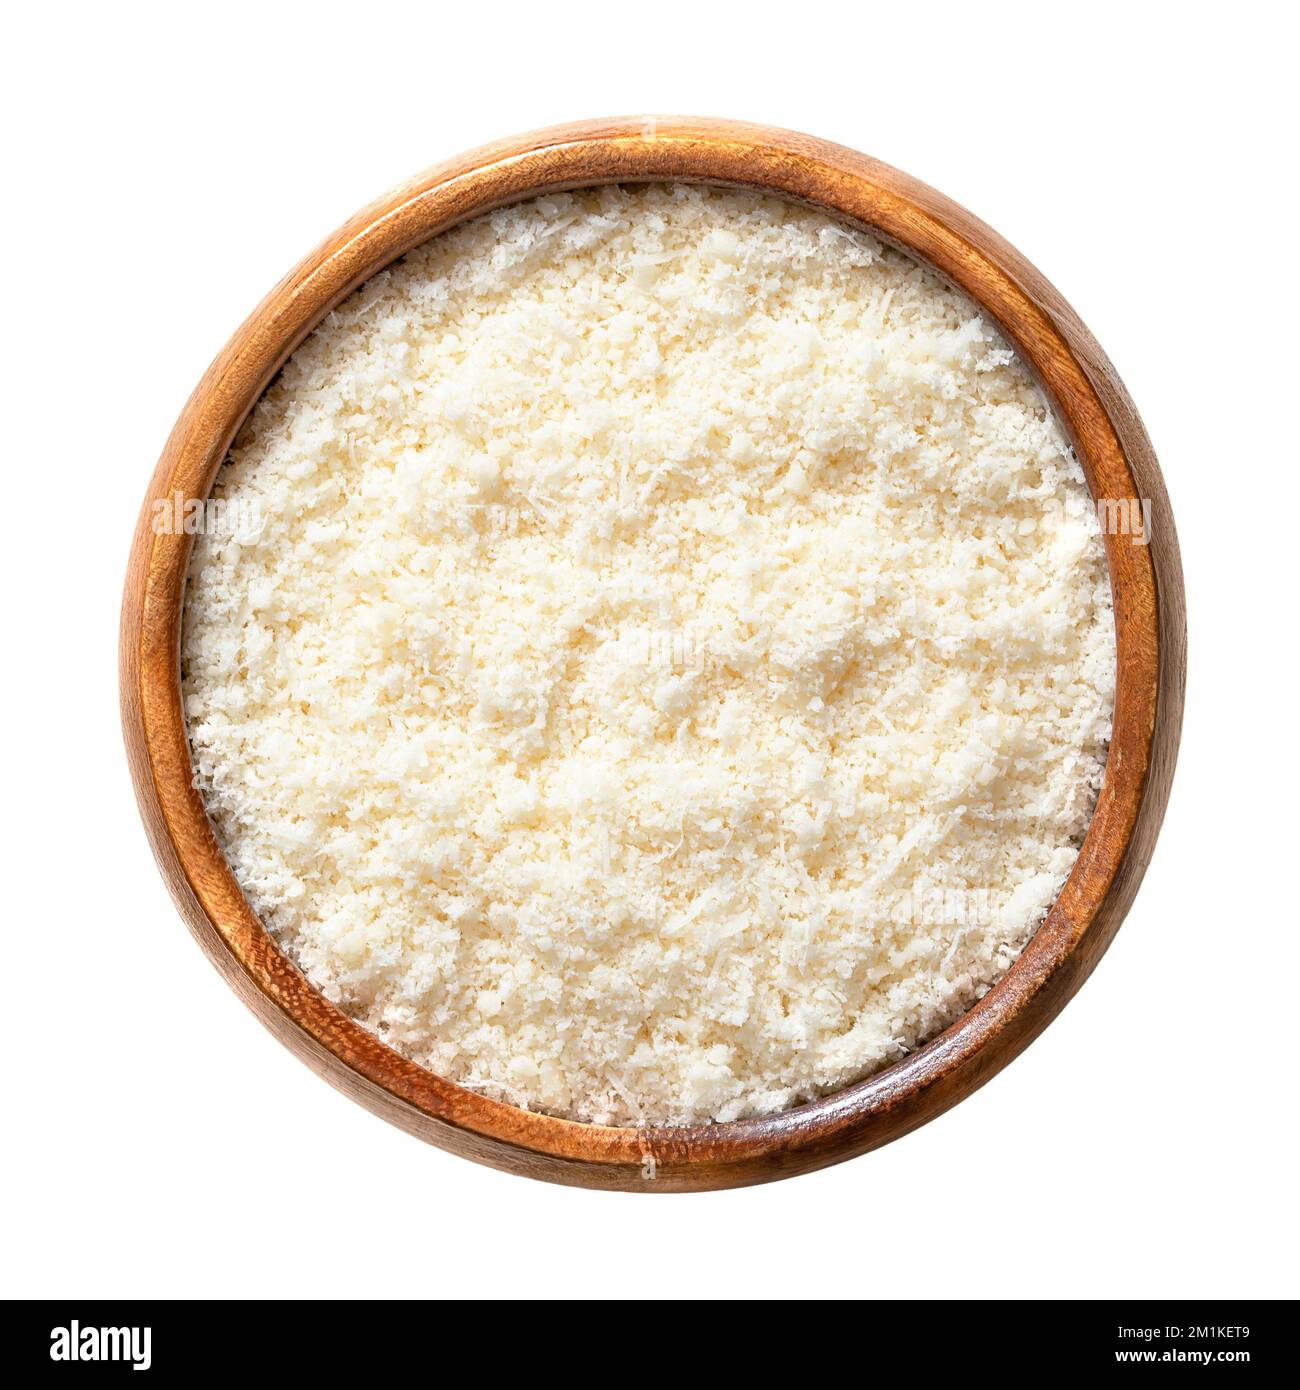 Grated Grana Padano cheese, in a wooden bowl. Italian hard cheese, similar to Parmesan, with strong savory flavor and slightly gritty texture. Stock Photo